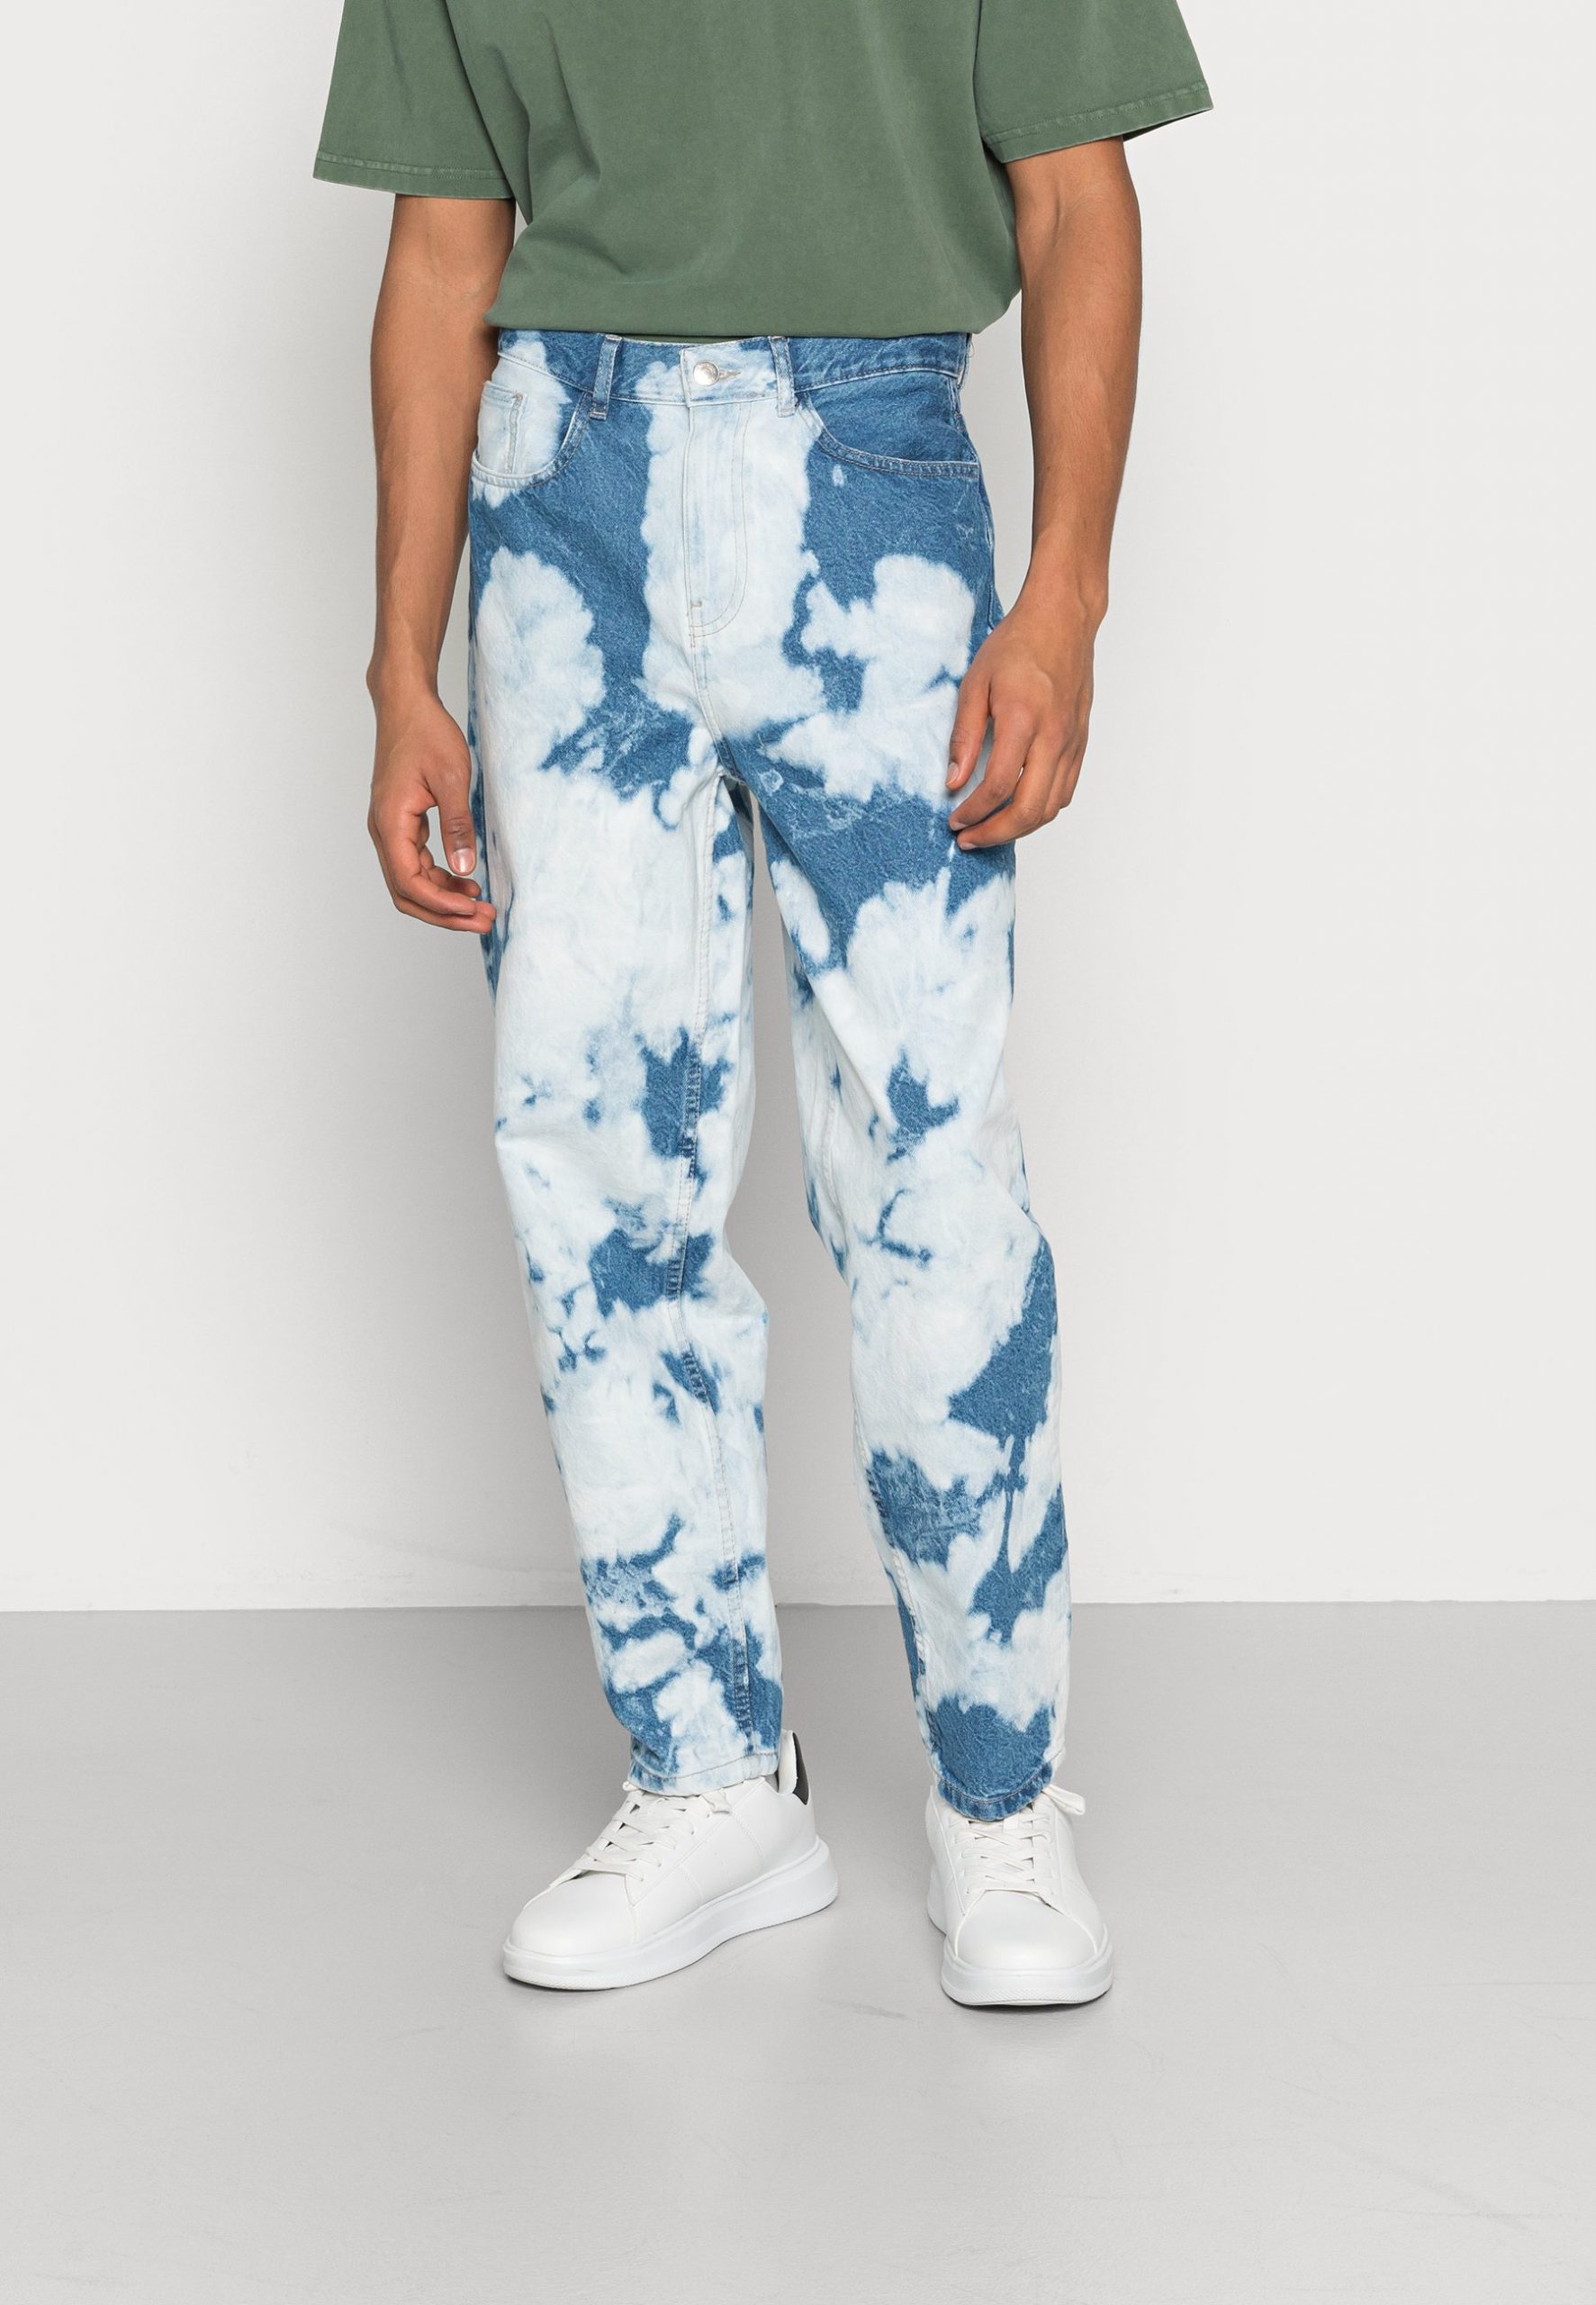 shopyourturn not expensive - Cut Price MOONWASH UNISEX - Relaxed fit jeans at price